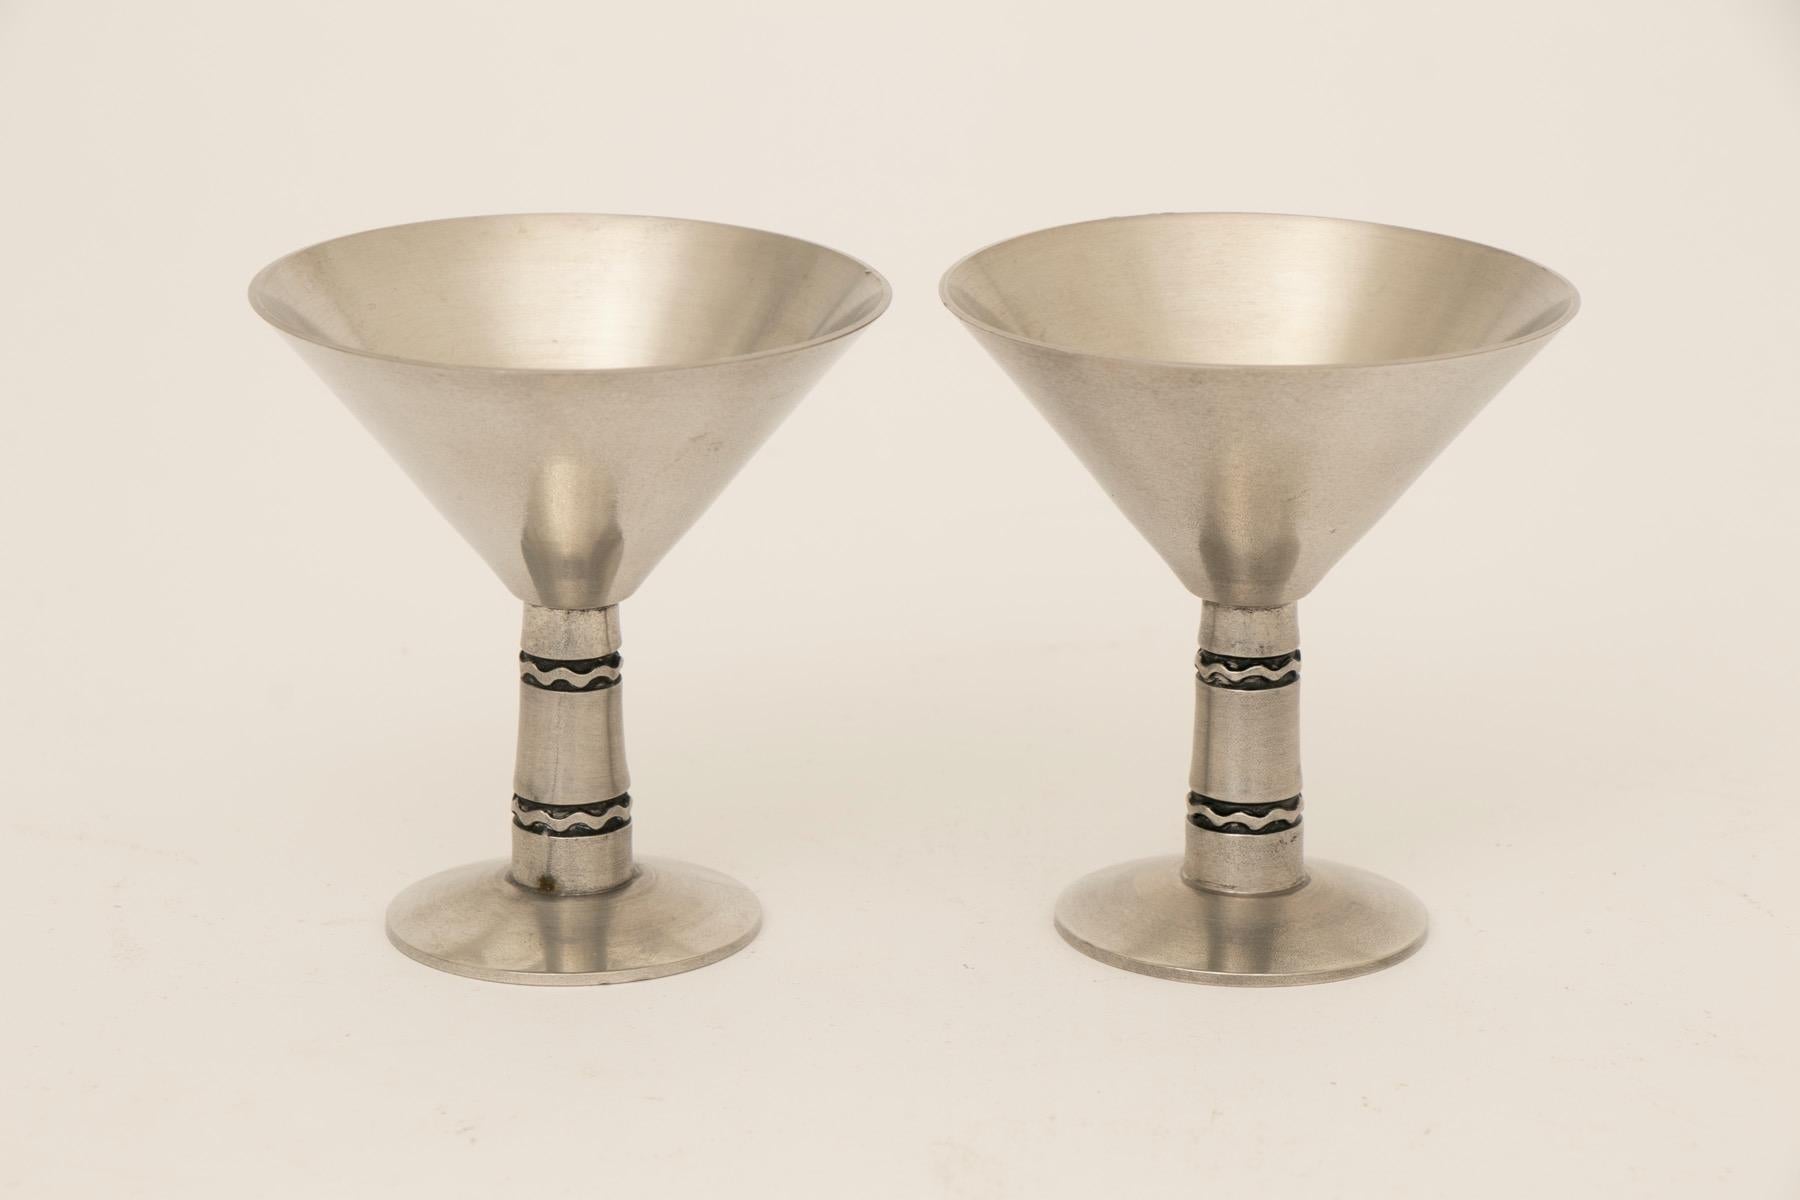 Stainless Steel Midcentury Georg Jensen Cocktail Shaker with Six Matched Cocktail Goblets Prese